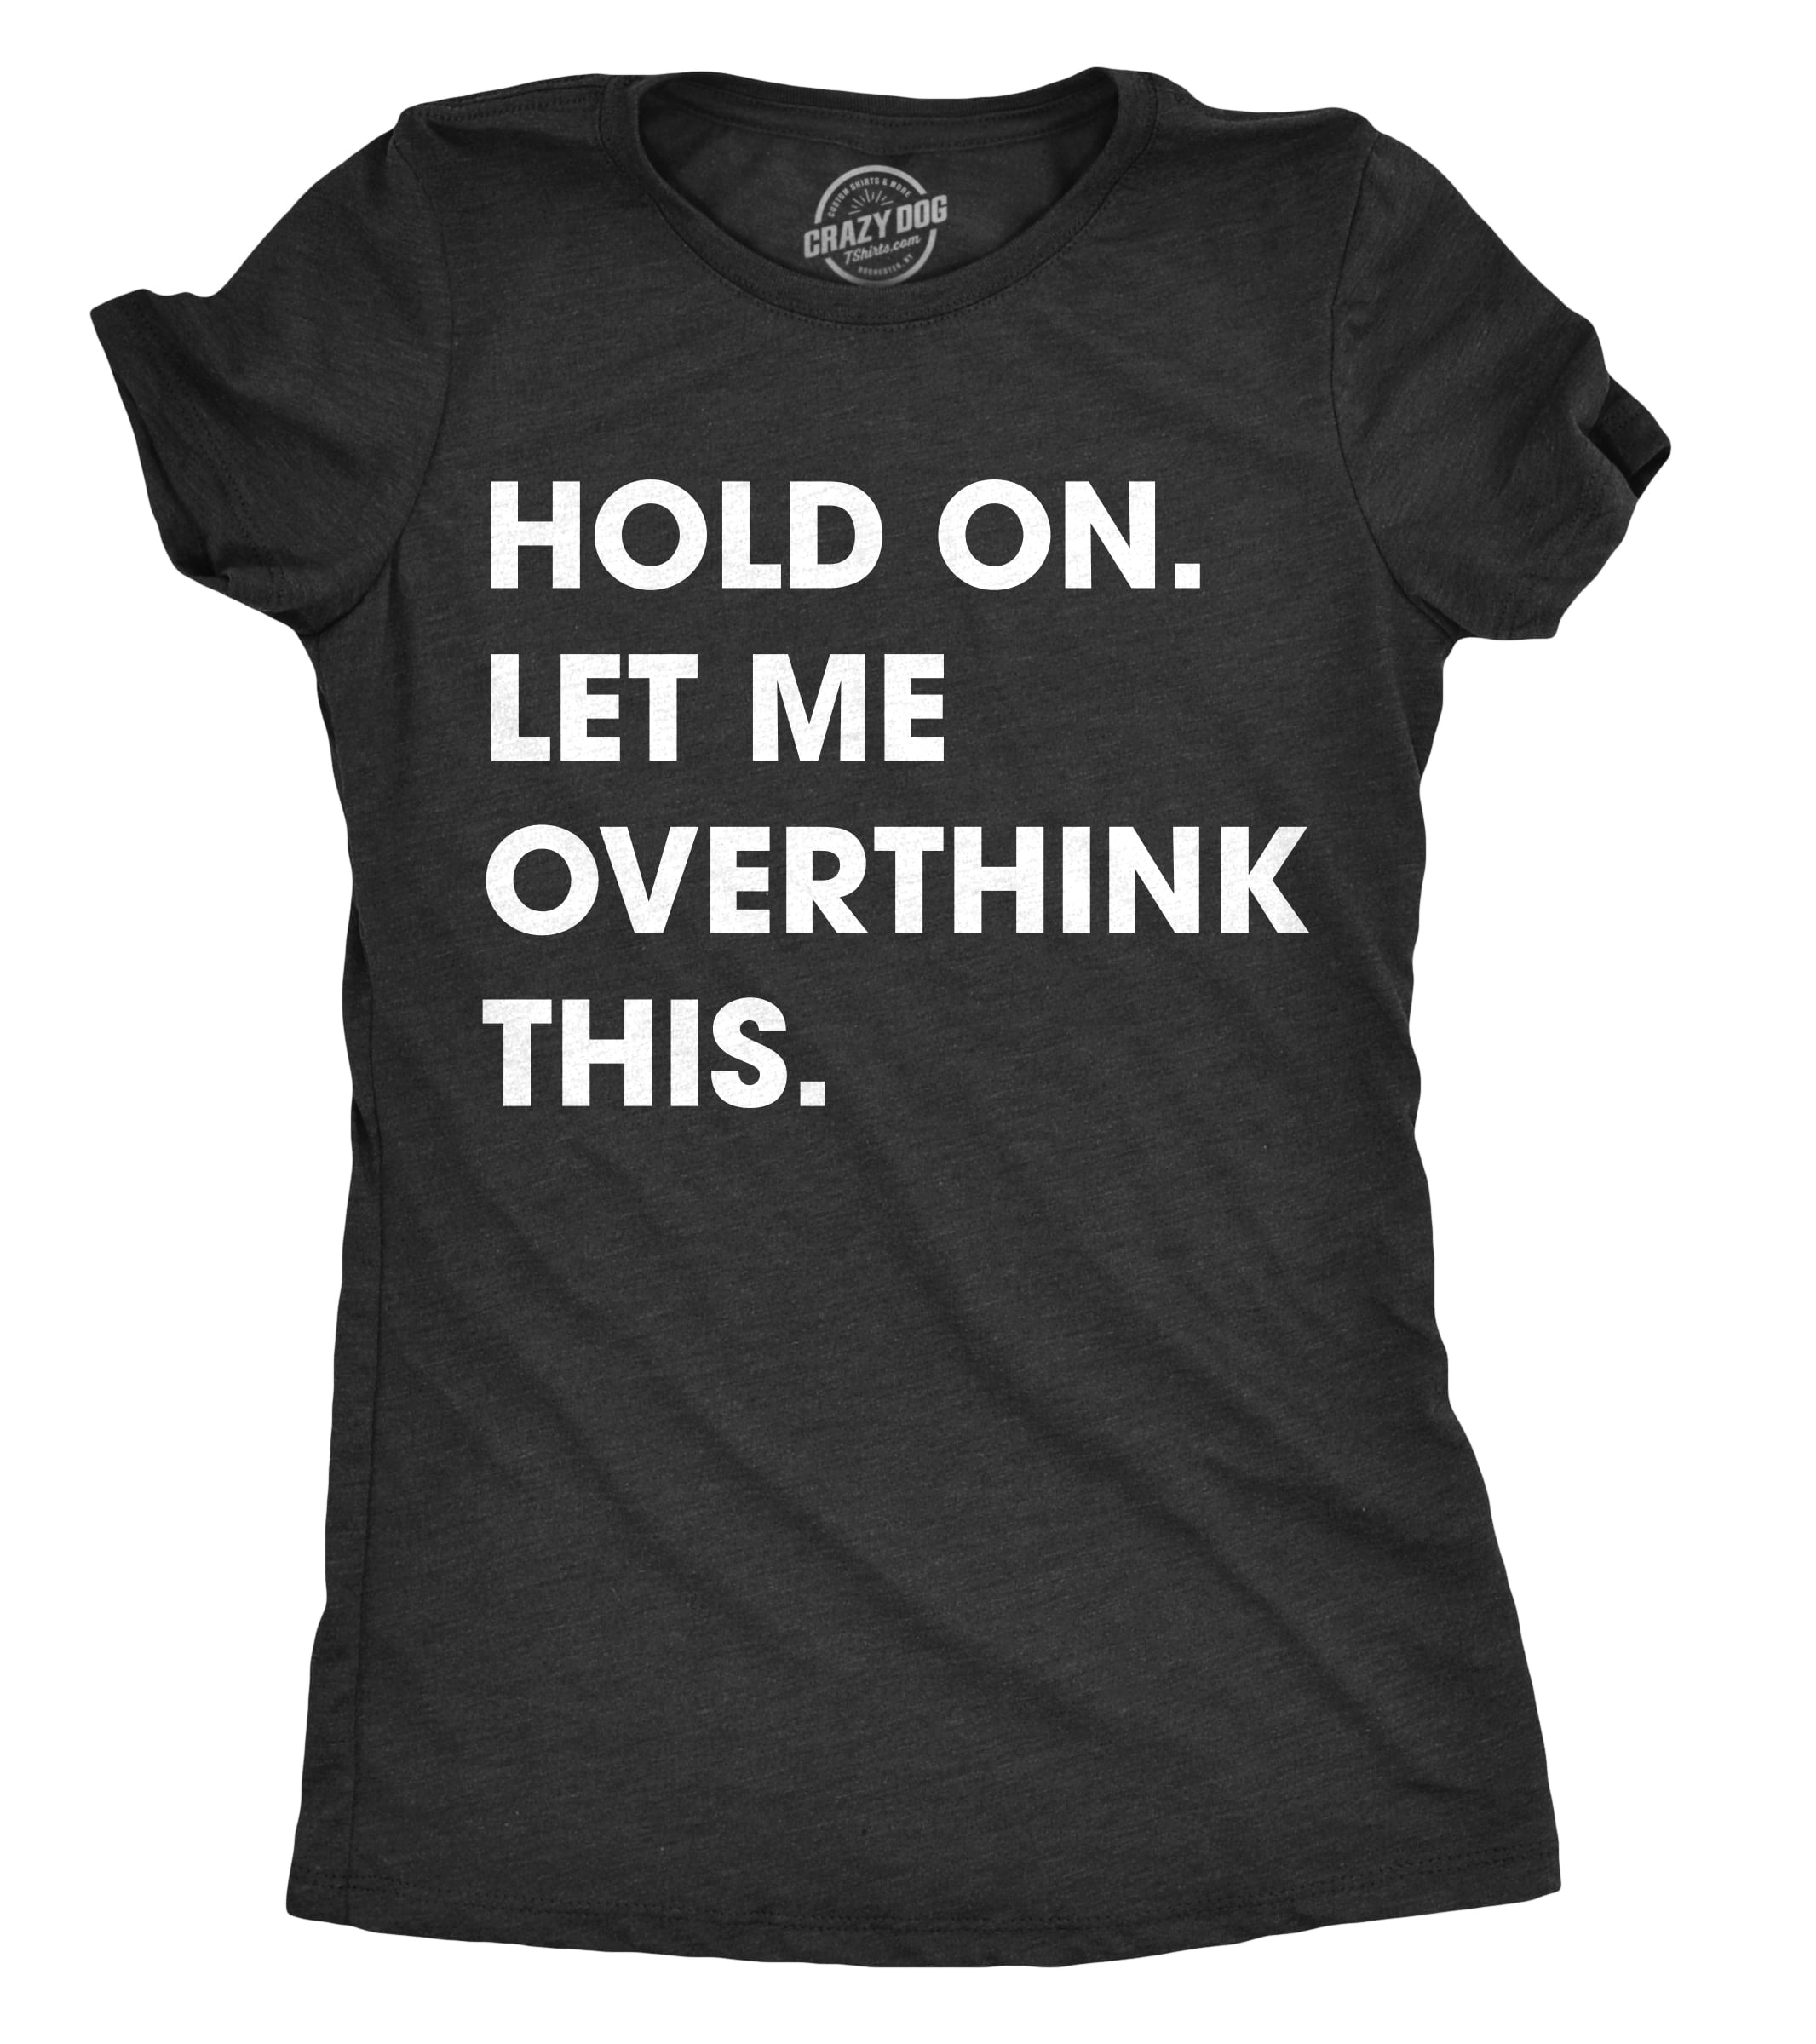 Funny Sarcastic Shirt Awkward T-shirt Hold On Let Me Overthink This Shirt Funny Shirt Workout Shirt Overthink Shirt Everyday T-shirt